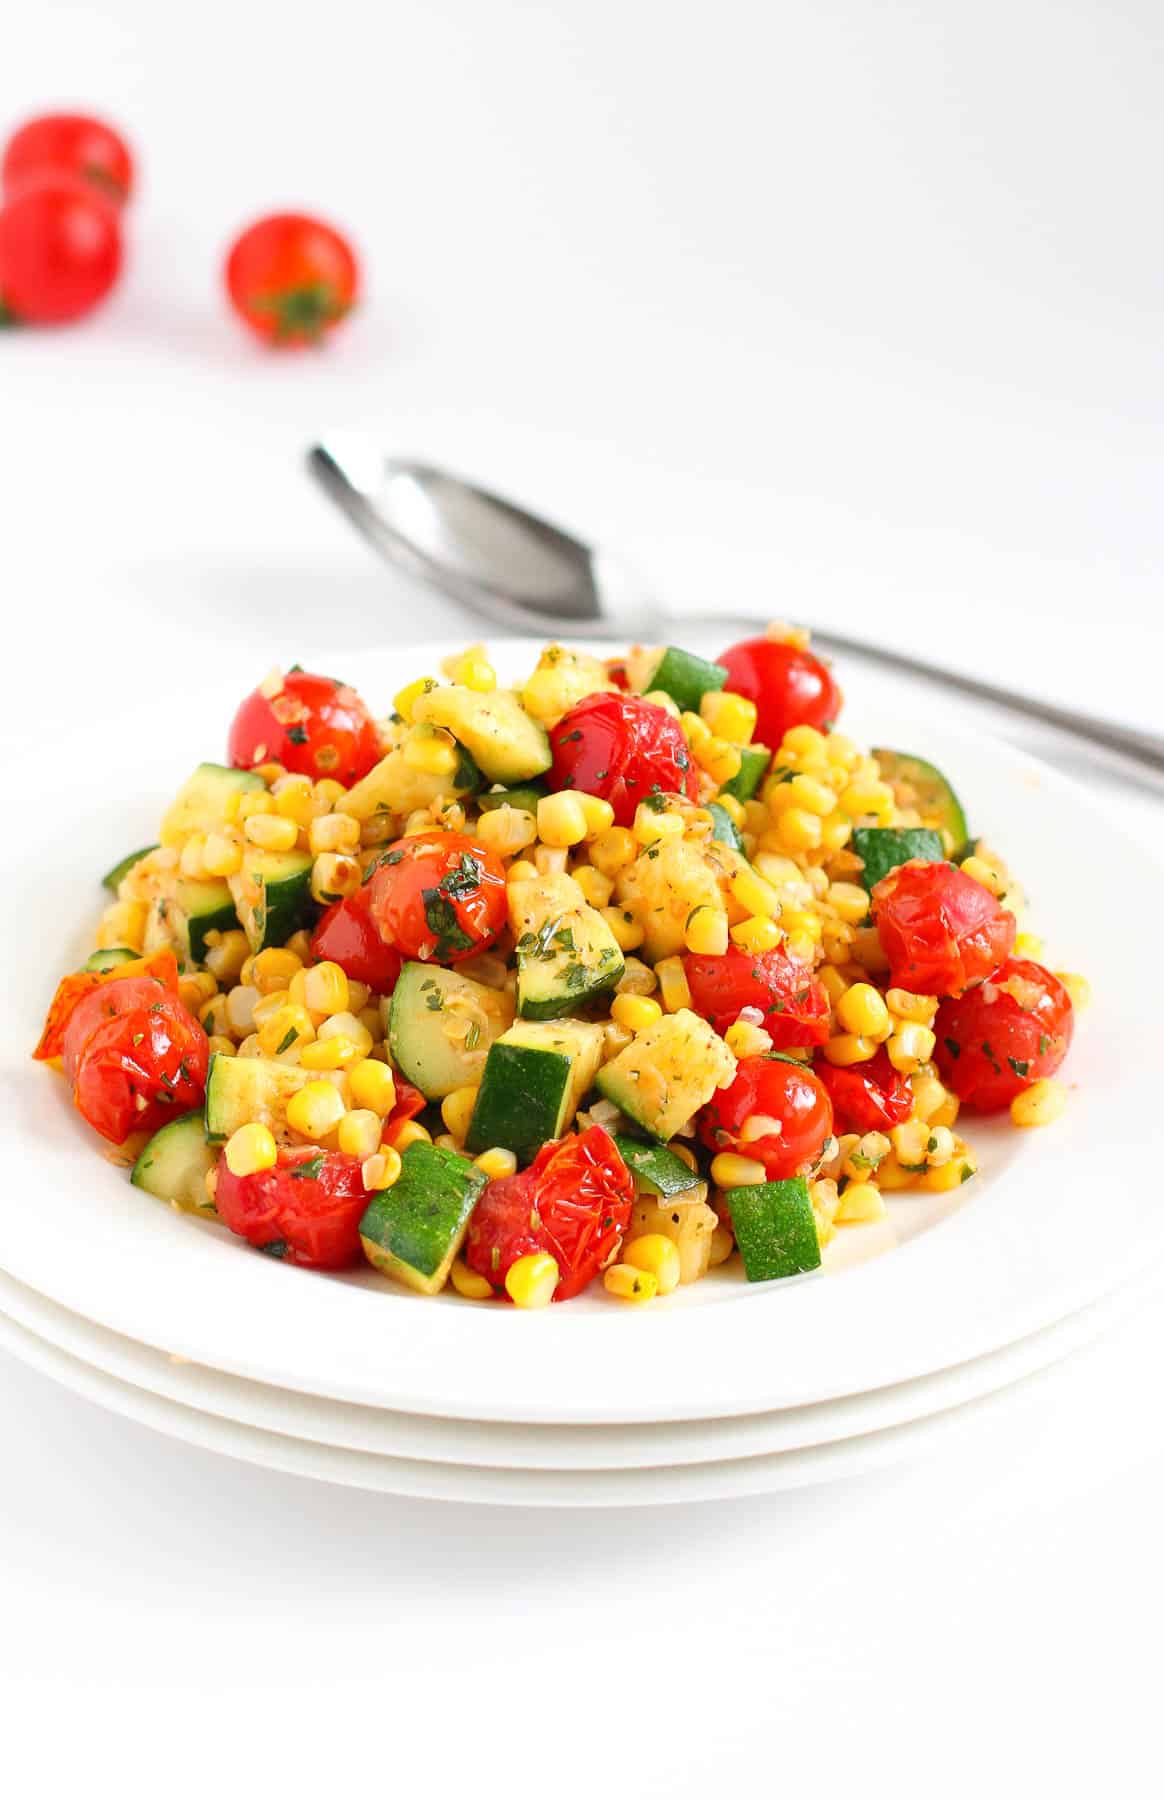 Sautéed corn, zucchini and tomatoes on a white plate.